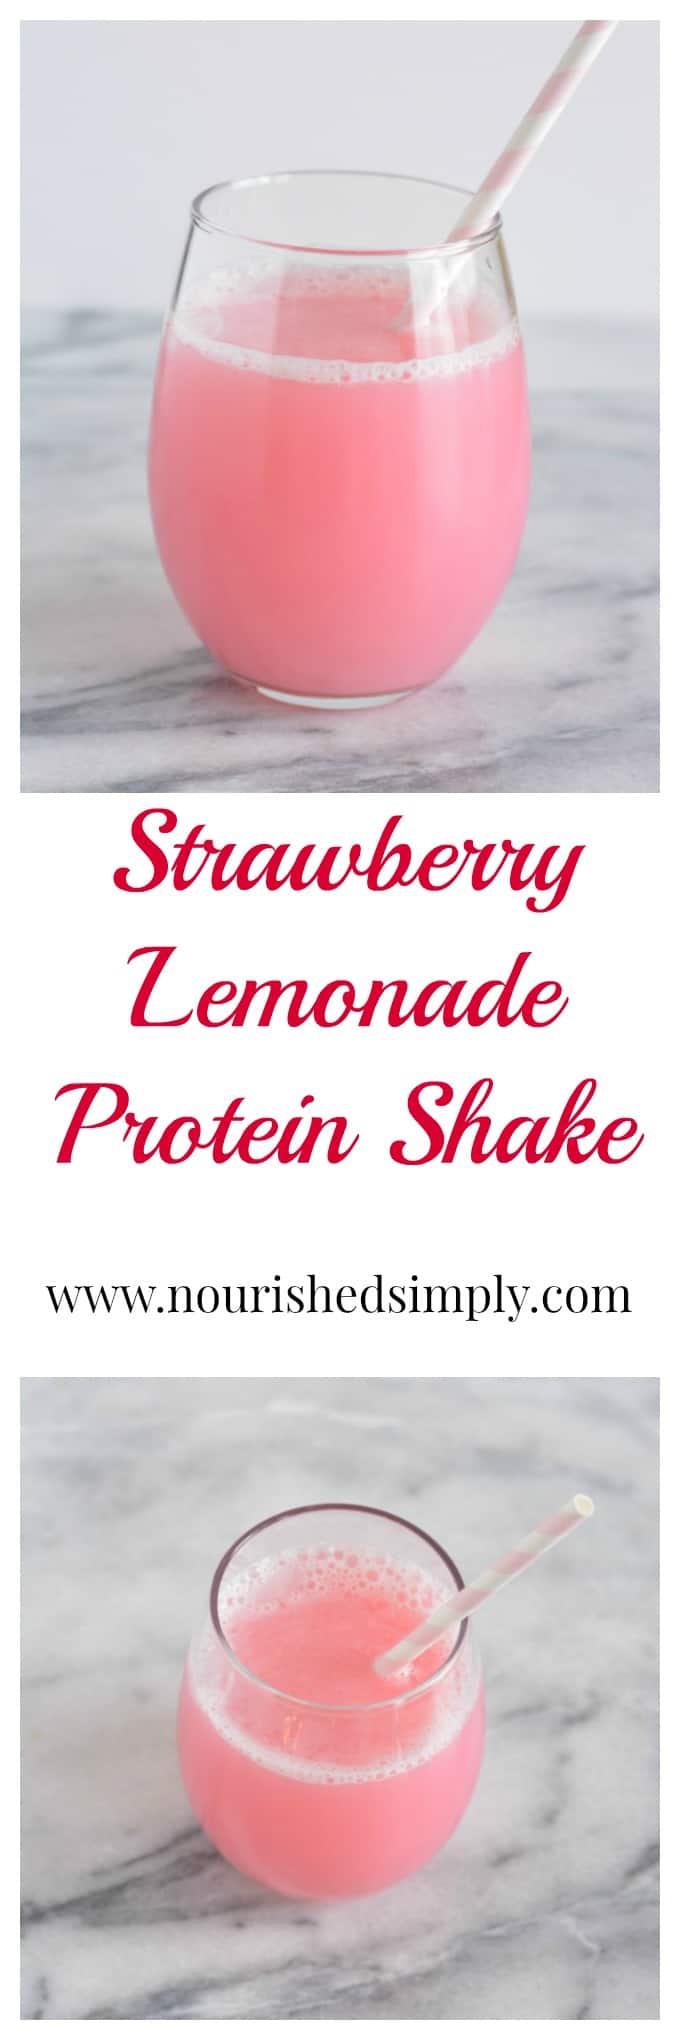 Strawberry Lemonade Protein Shake is sugar free and rich in protein.